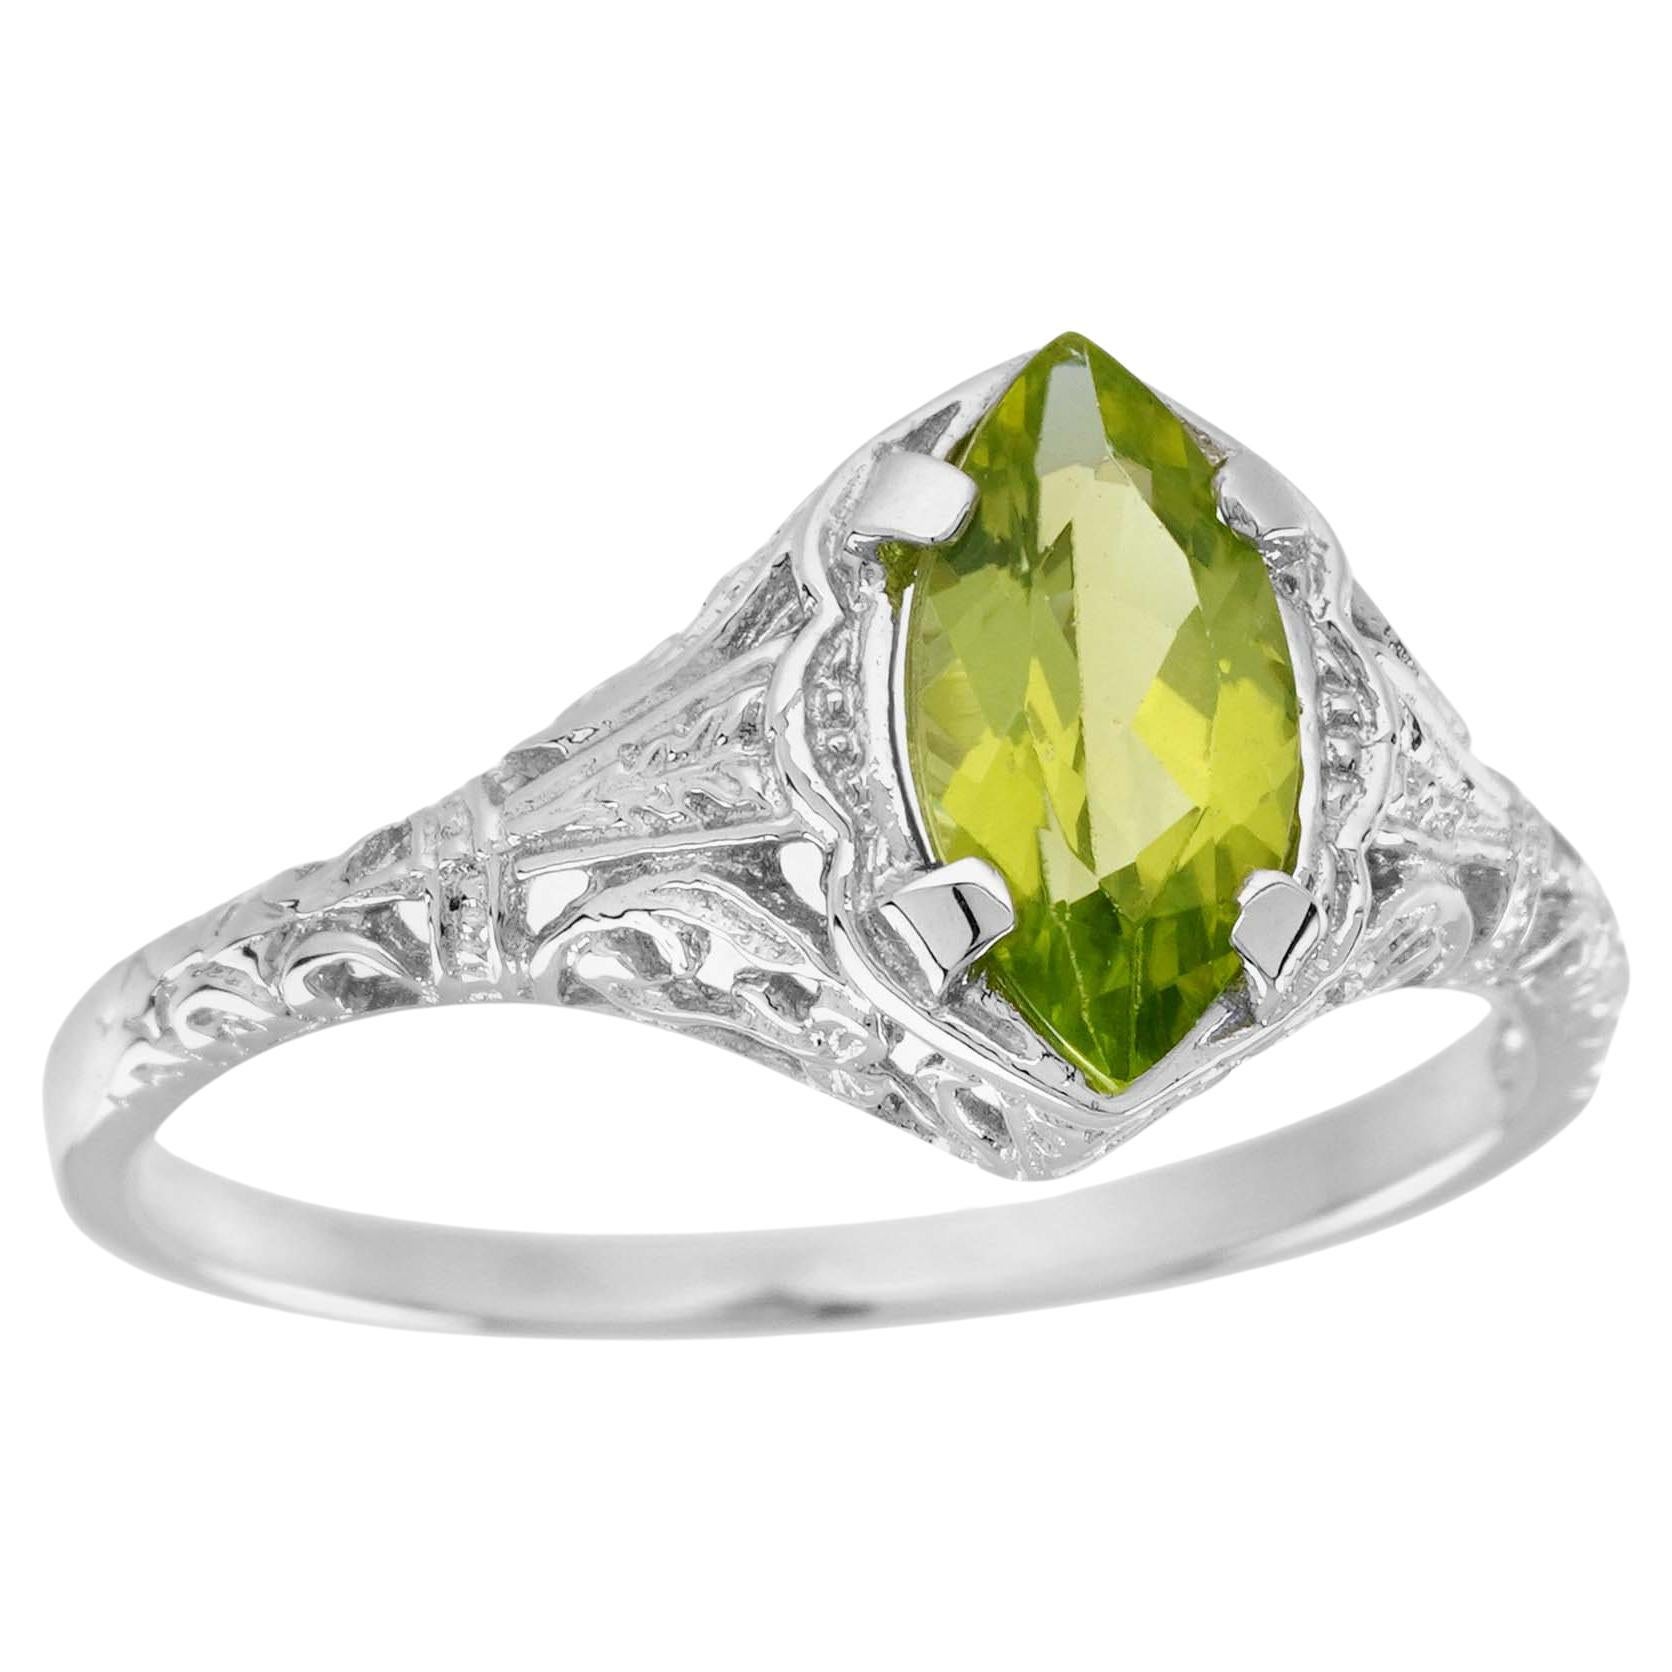 Natural Marquise Peridot Vintage Style Filigree Ring in Solid 9K White Gold